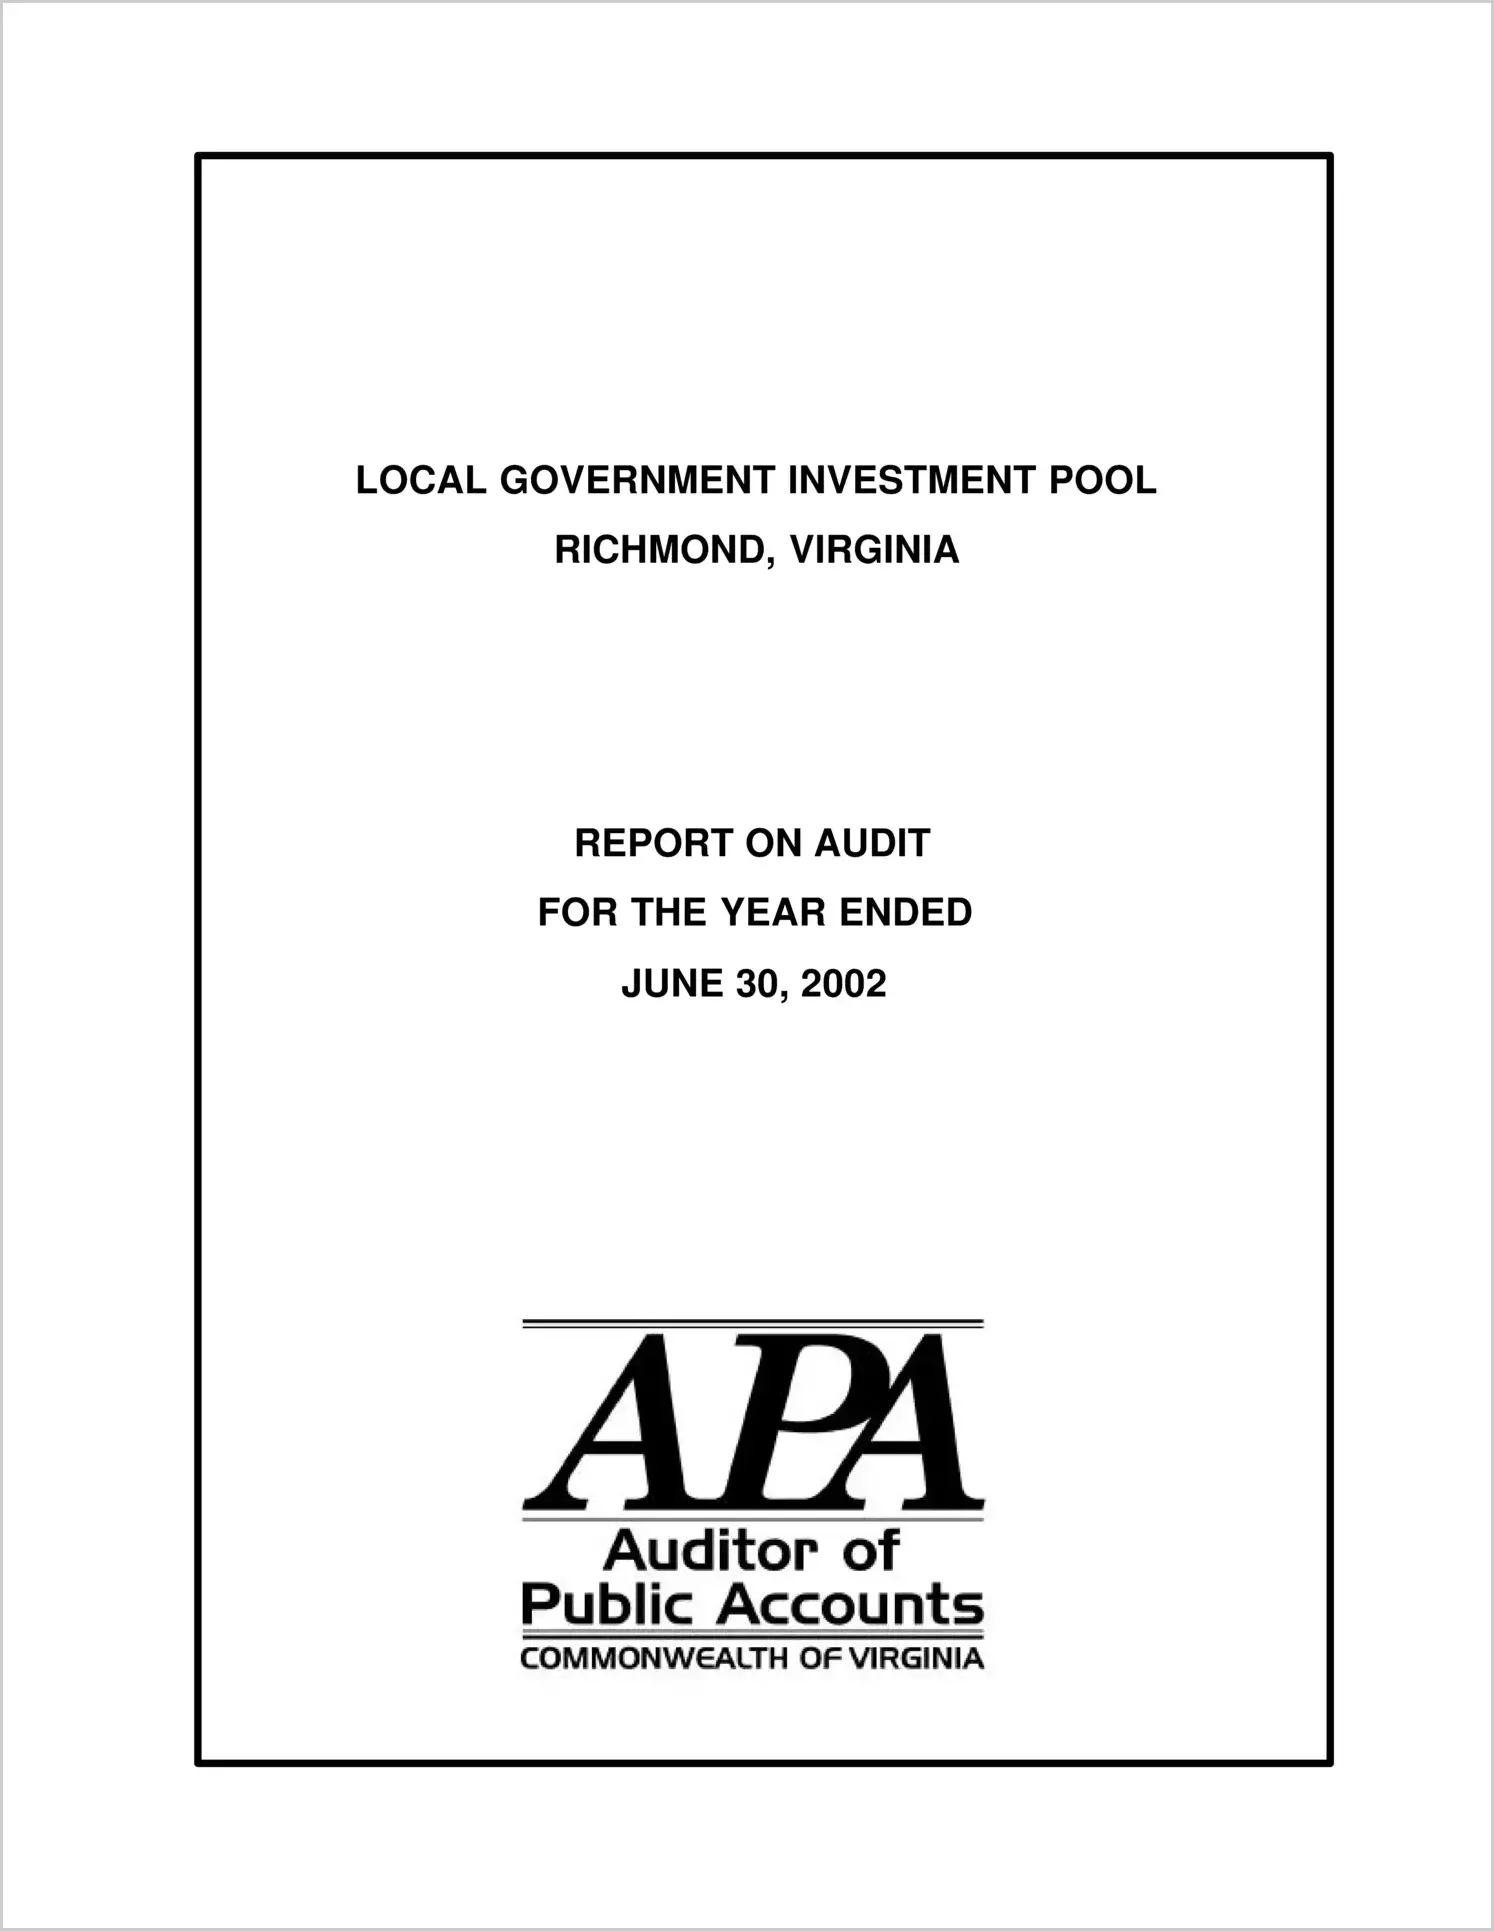 Local Government Investment Pool for the year ended June 30, 2002